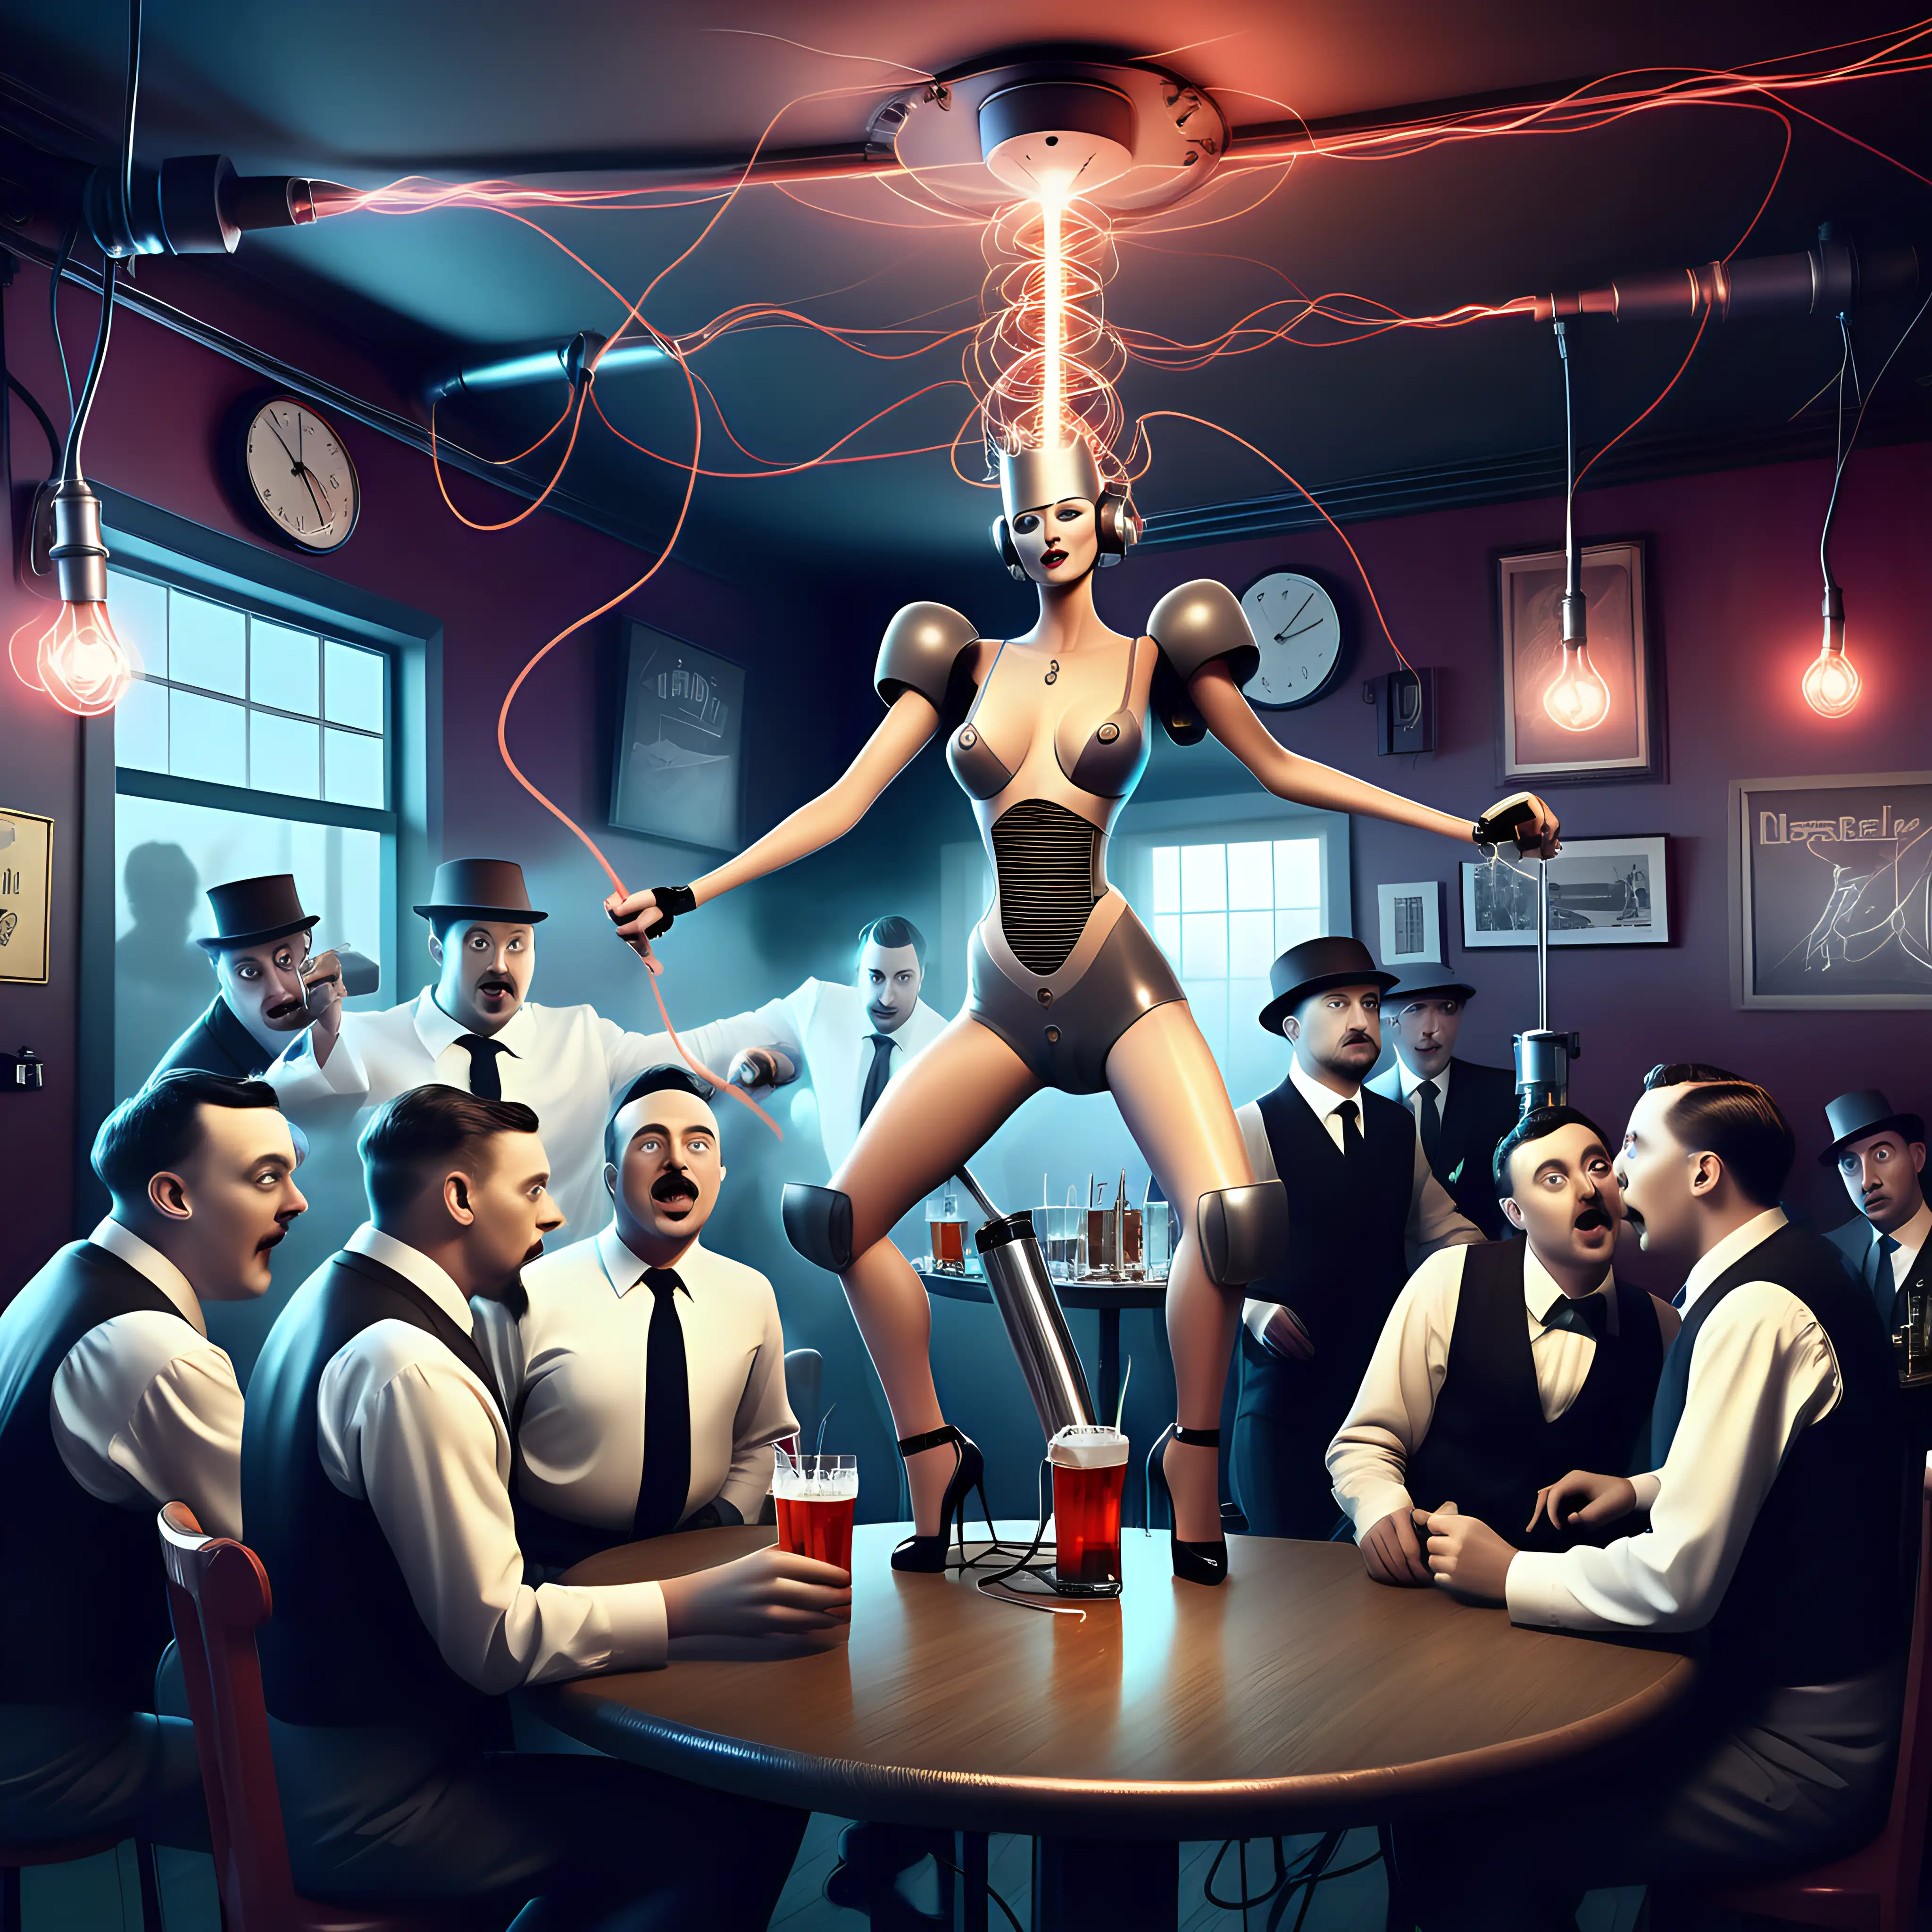 Surrealistic Party Scene Drunk Electrical Engineers and Tesla Coil Fun